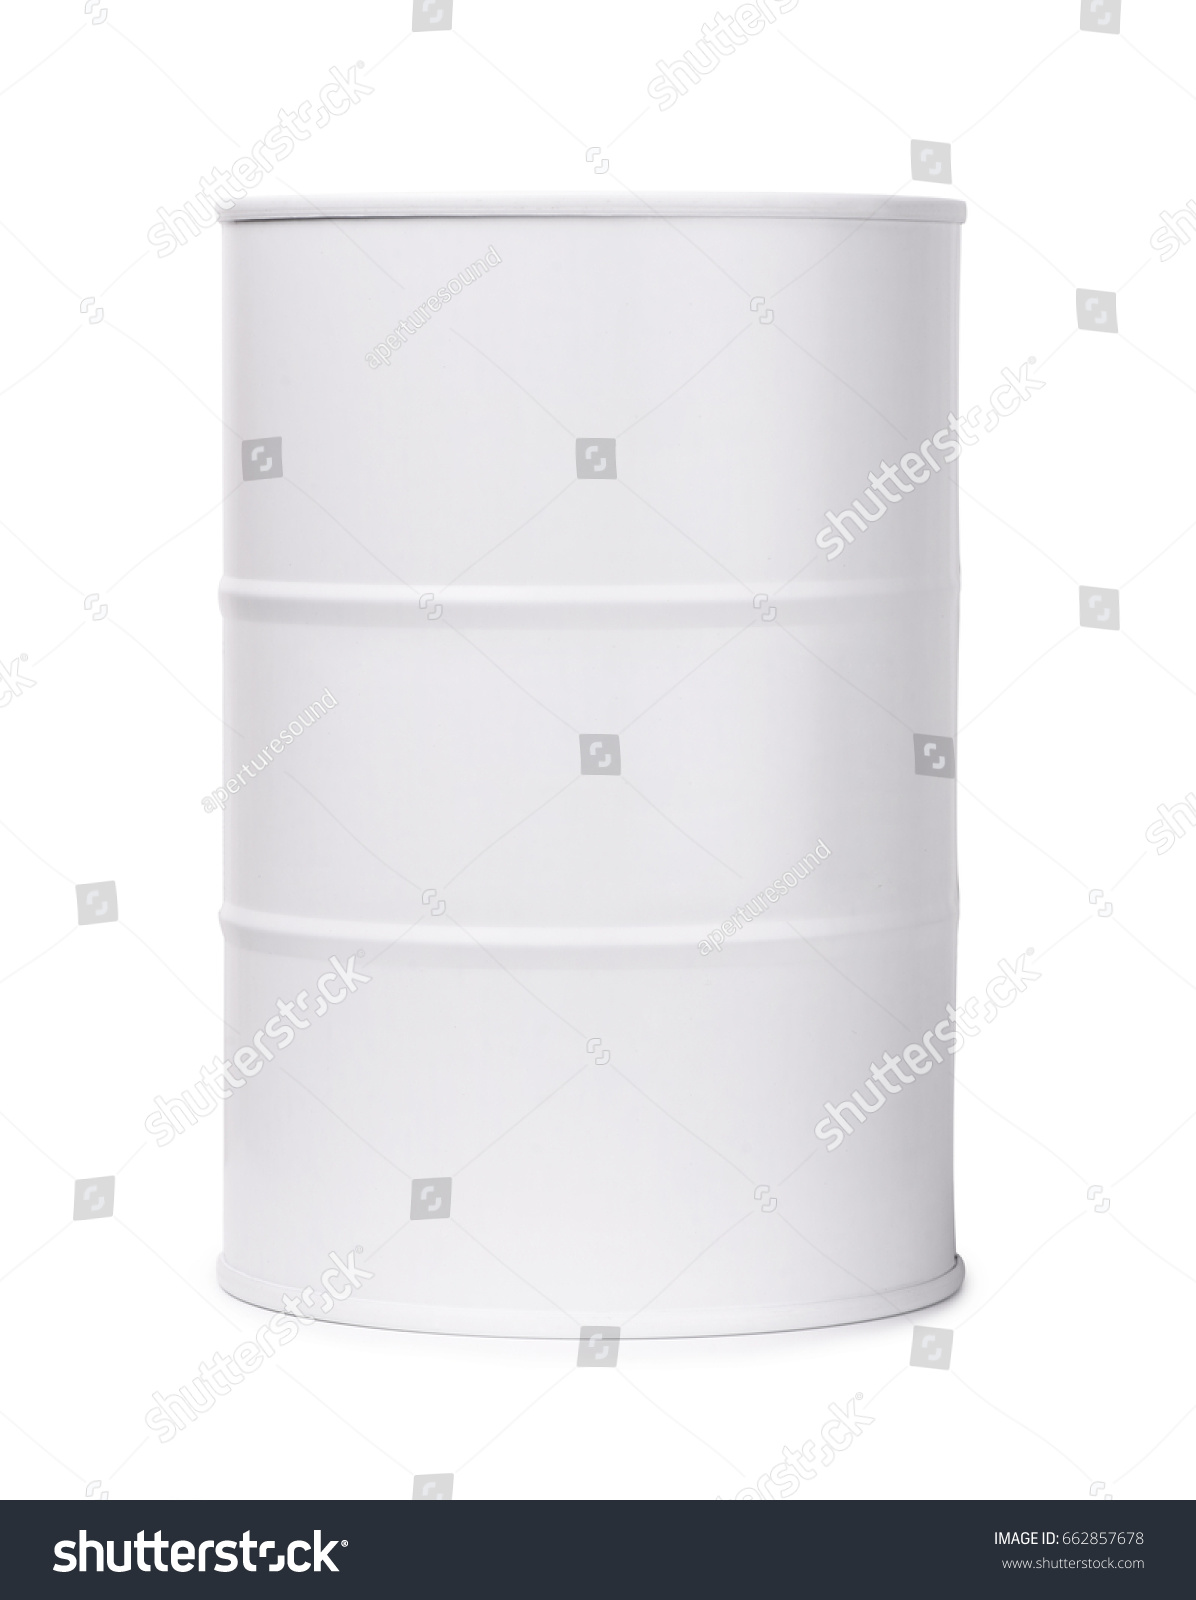 White barrel of fuel or chemicals isolated on a white background  #662857678